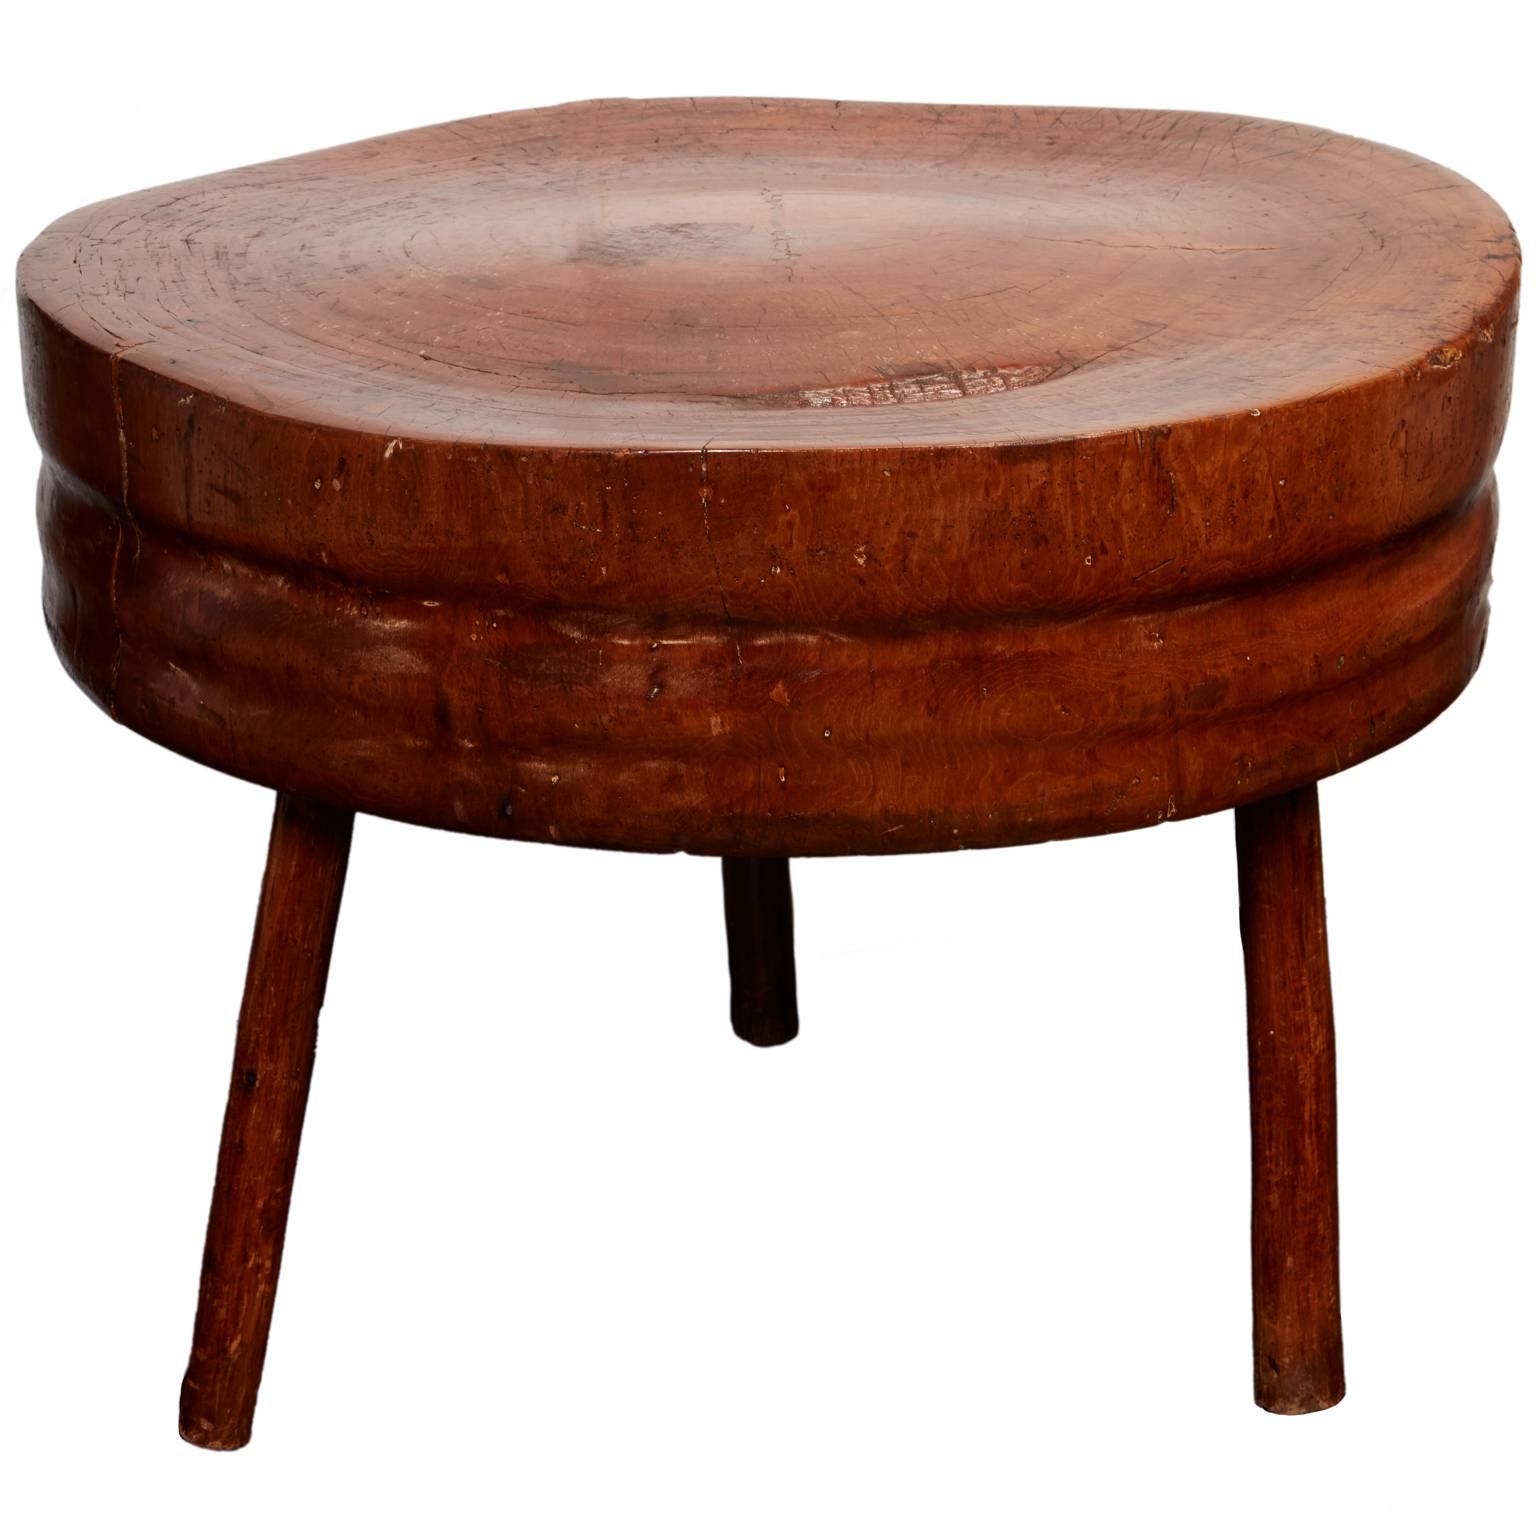 19th and early 20th century blacksmiths and butchers used tree trunk stools for work surfaces, as the weight of the wood easily absorbed the shock of hammers and cleavers. Crafted from a complete tree trunk segment, this pristine three-legged